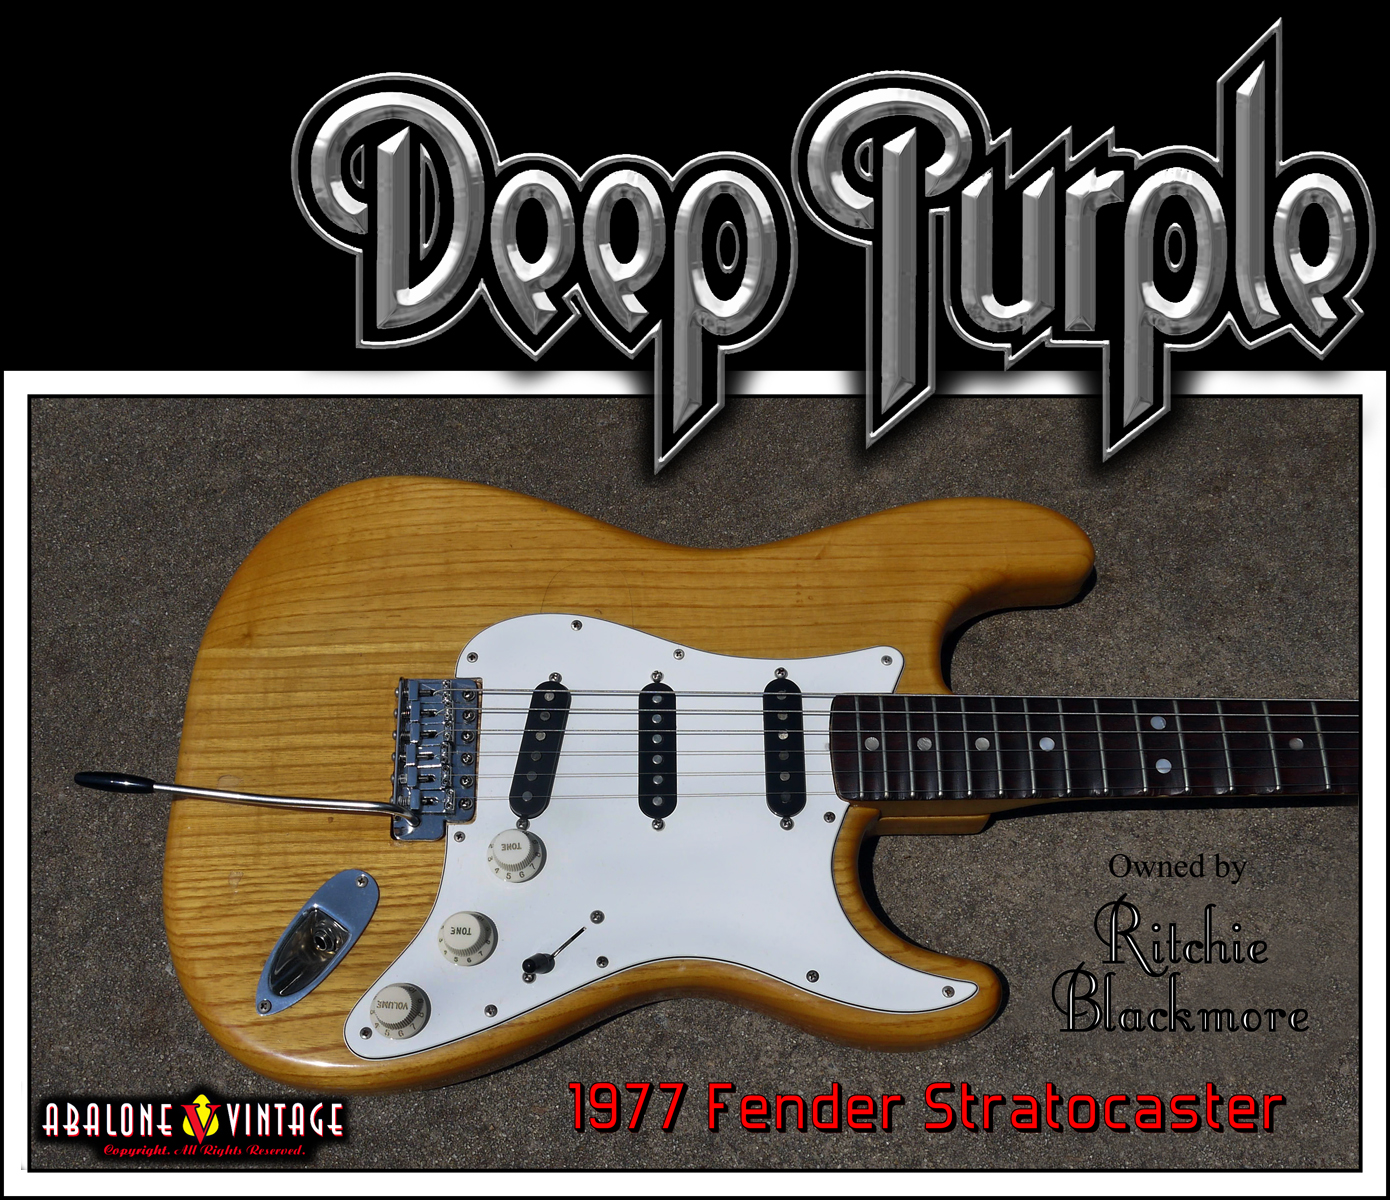 1977 fender stratocaster owned by ritchie blackmore of deep purple and rainbow.